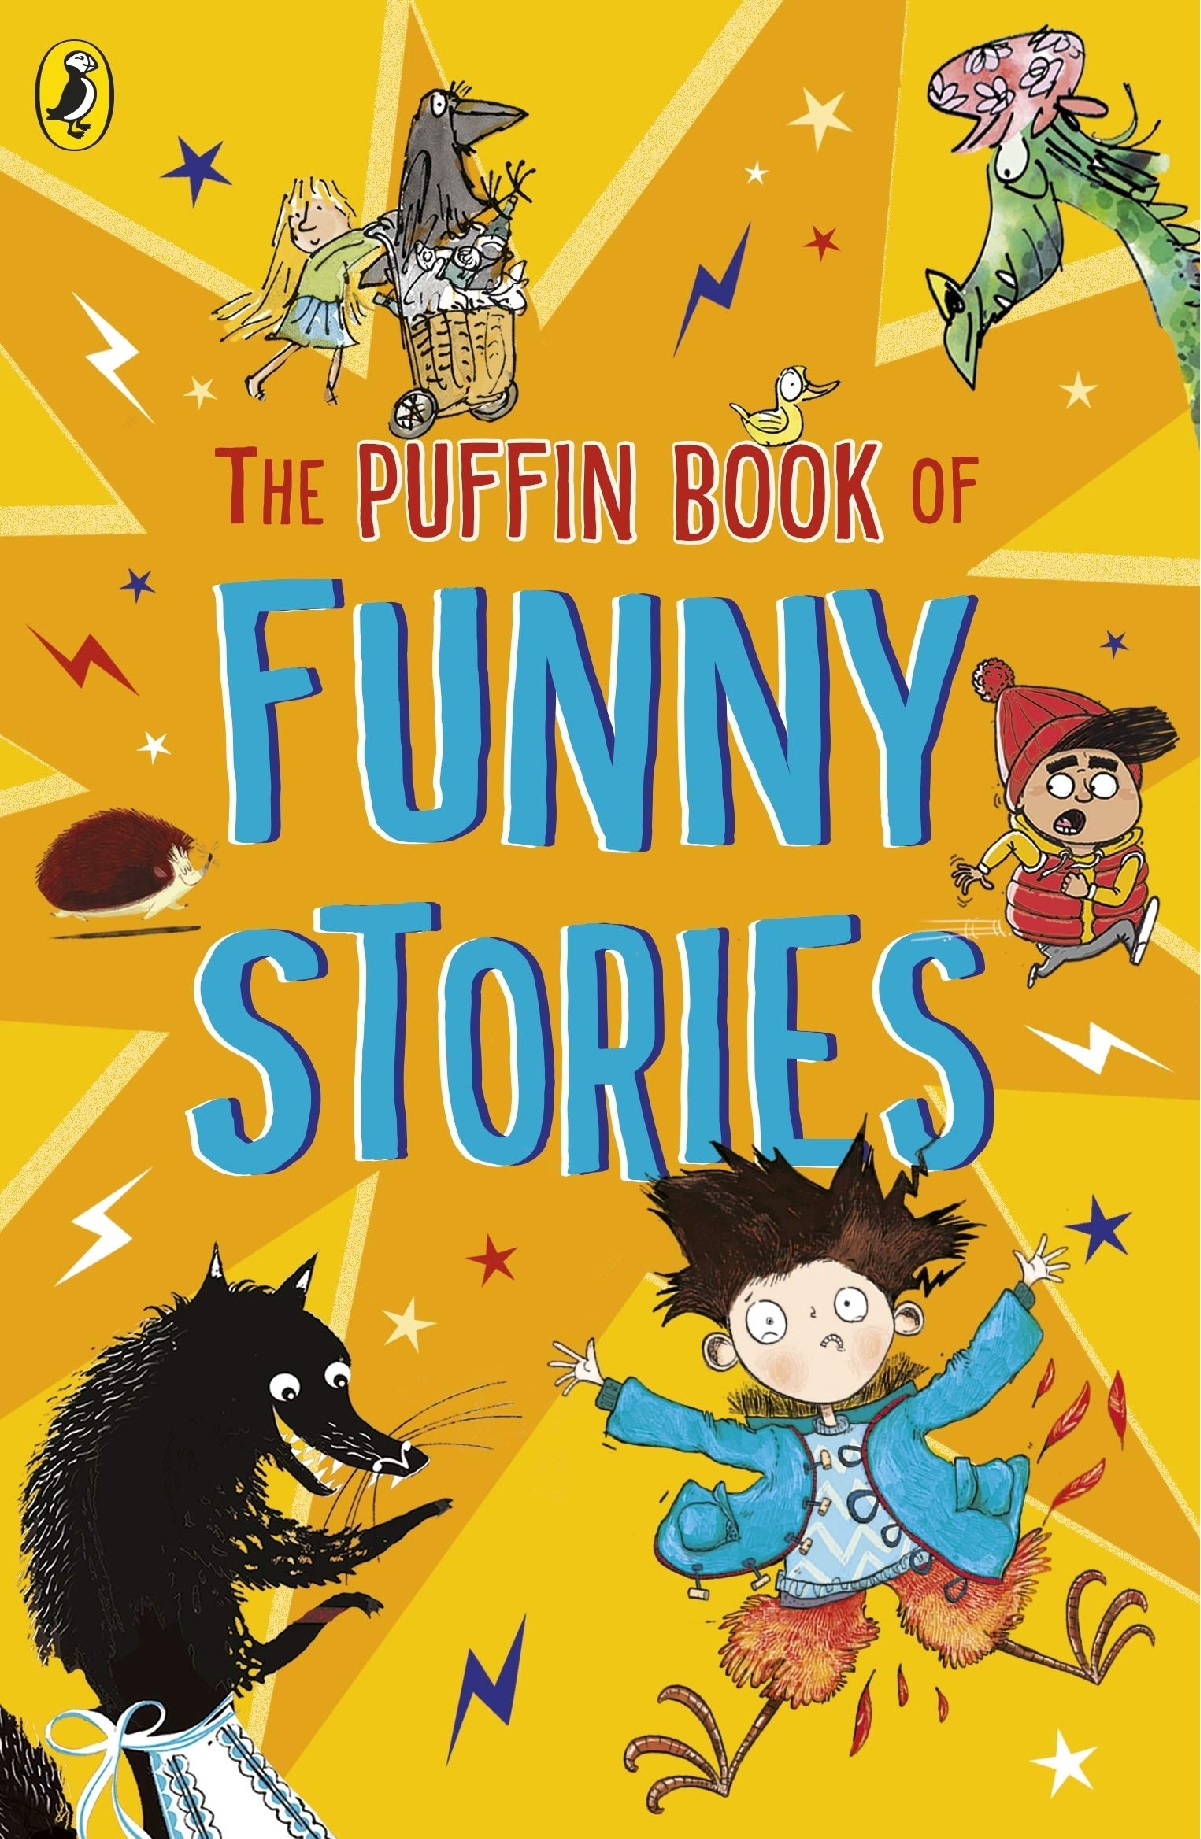 The Puffin Book of Funny Stories |  image7